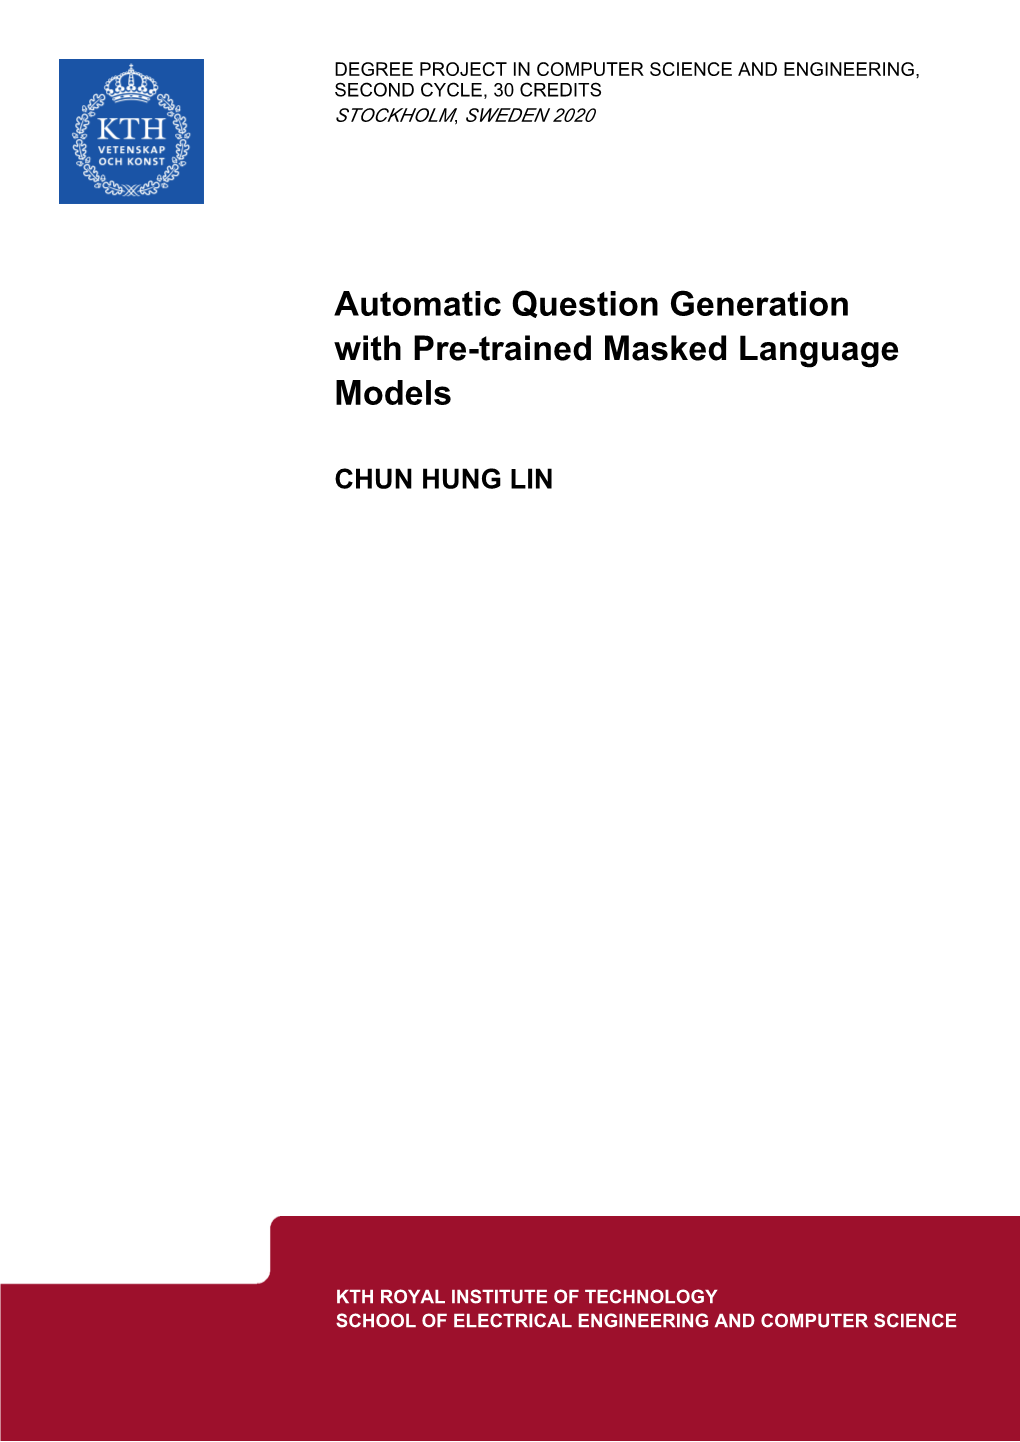 Automatic Question Generation with Pre-Trained Masked Language Models